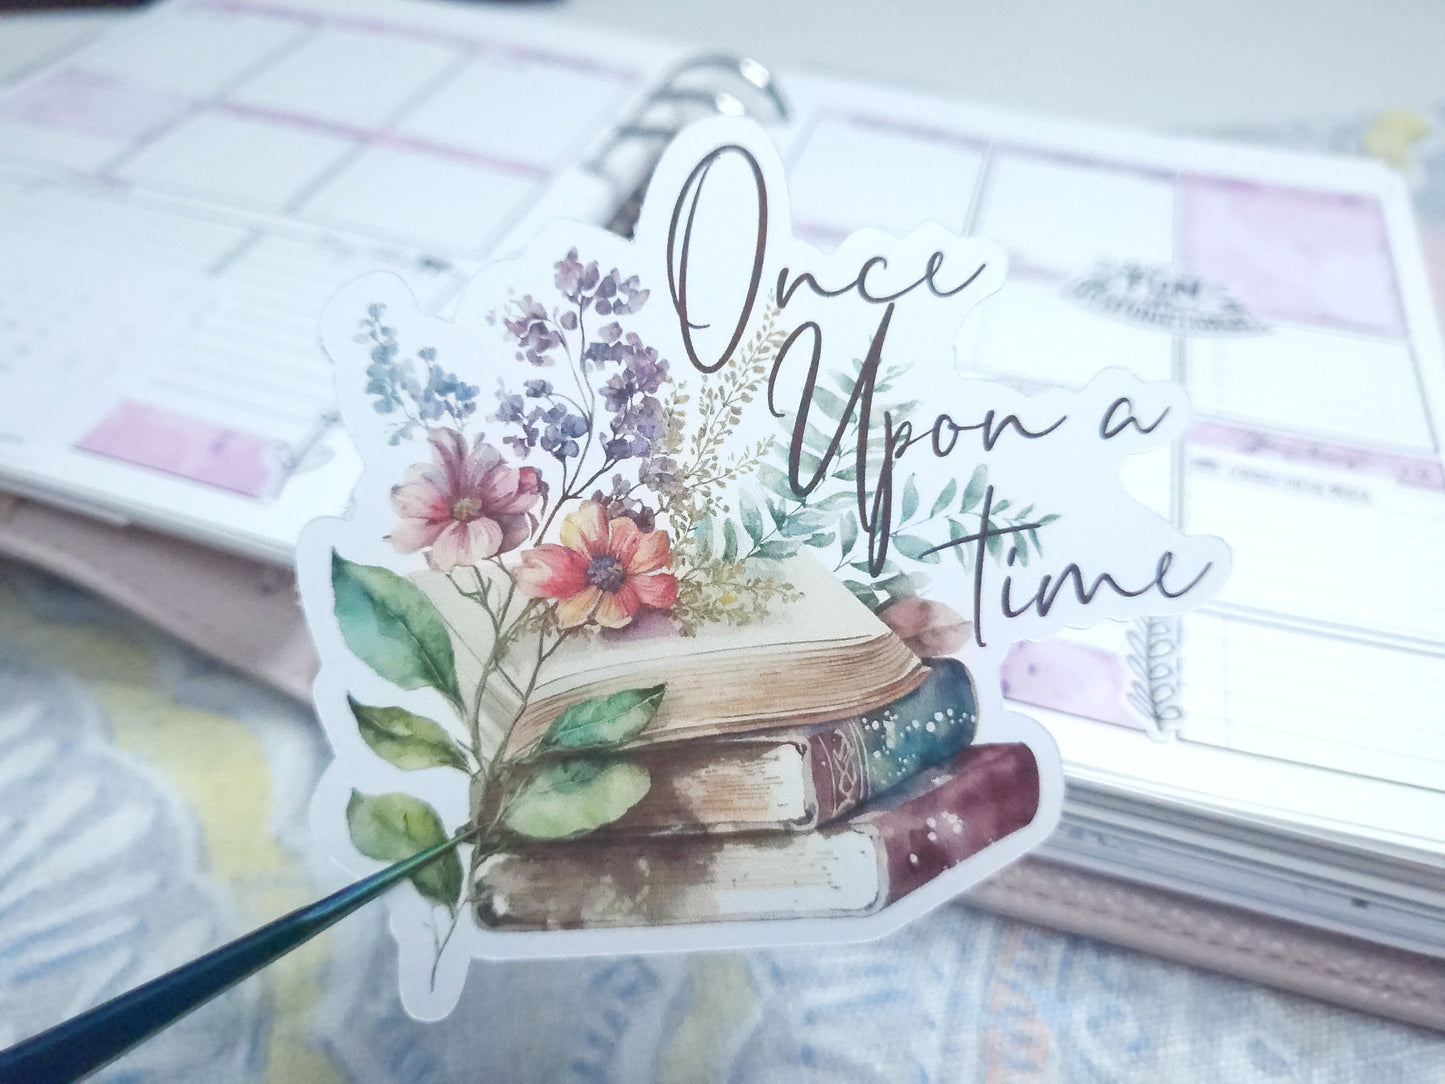 Die Cut - Once Upon a Time